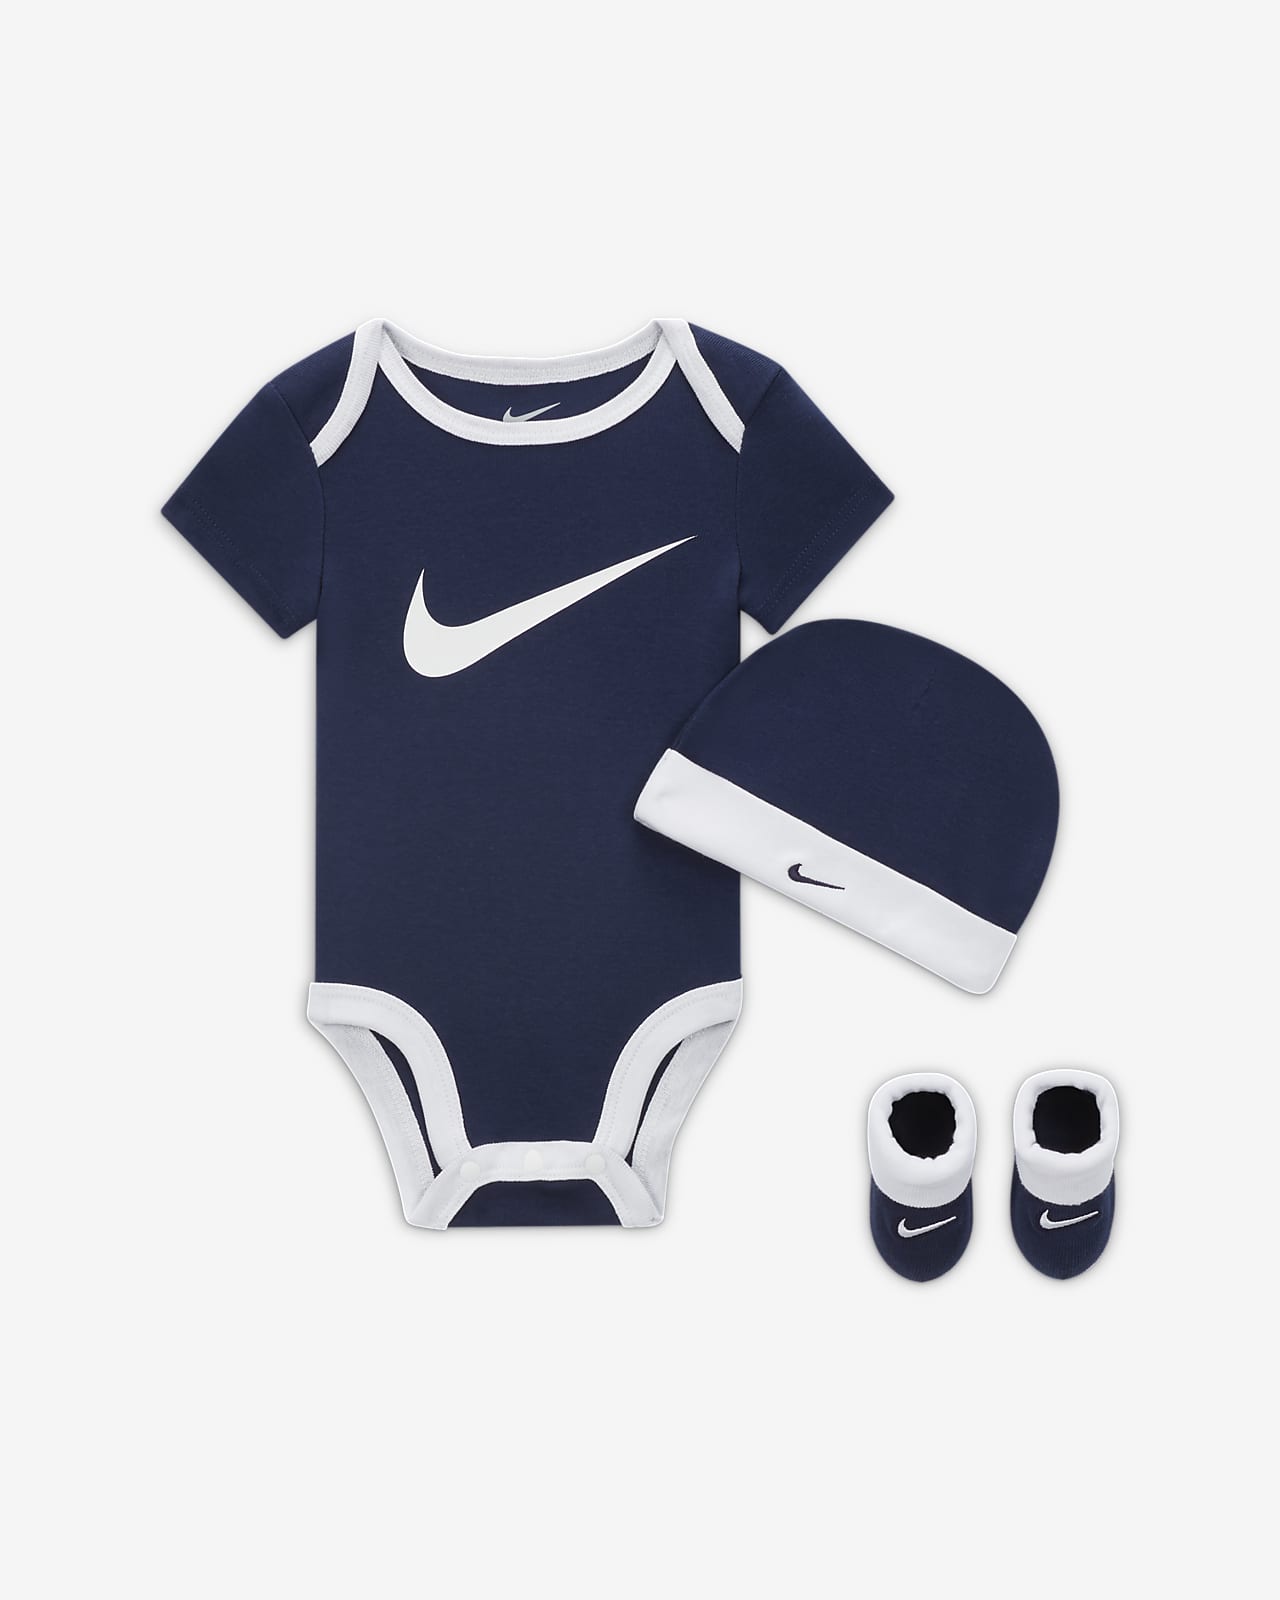 Nike Baby (0-6M) Hat and Booties Set.